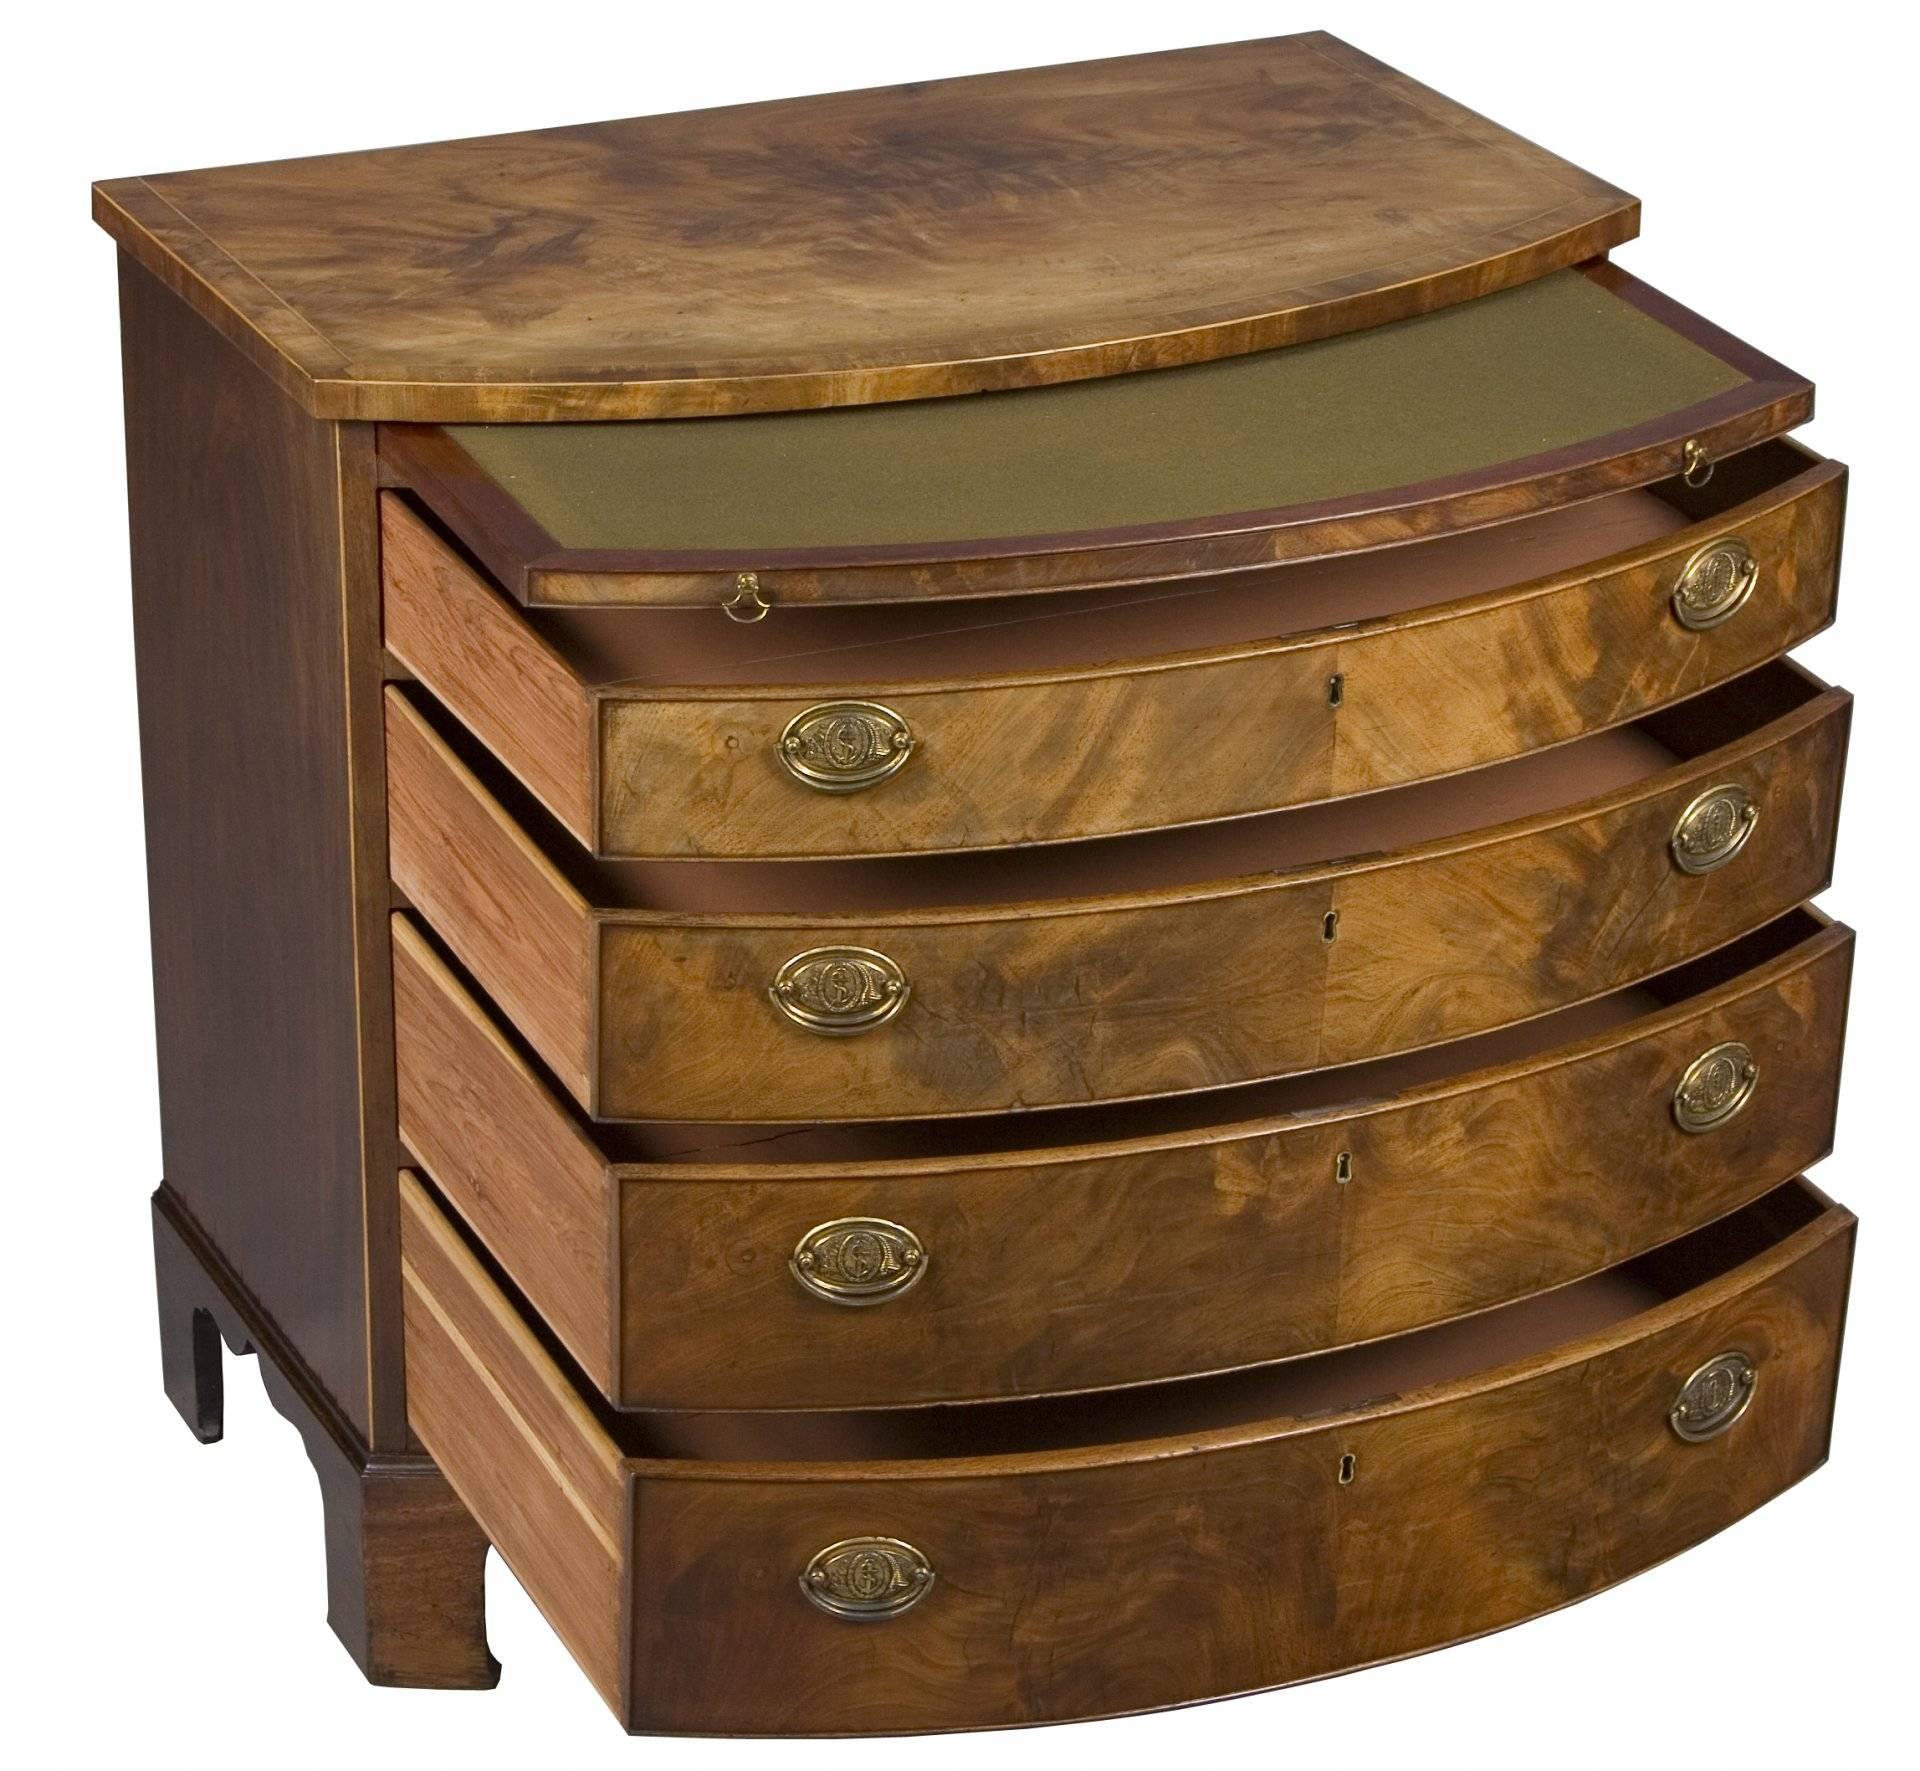 As you can see, this bow front chest of drawers comes with a brushing slide to the top. A brushing slide was originally used to lay clothes on and brush the lint off before dressing. Today, it provides a Classic look and can be used as extra space